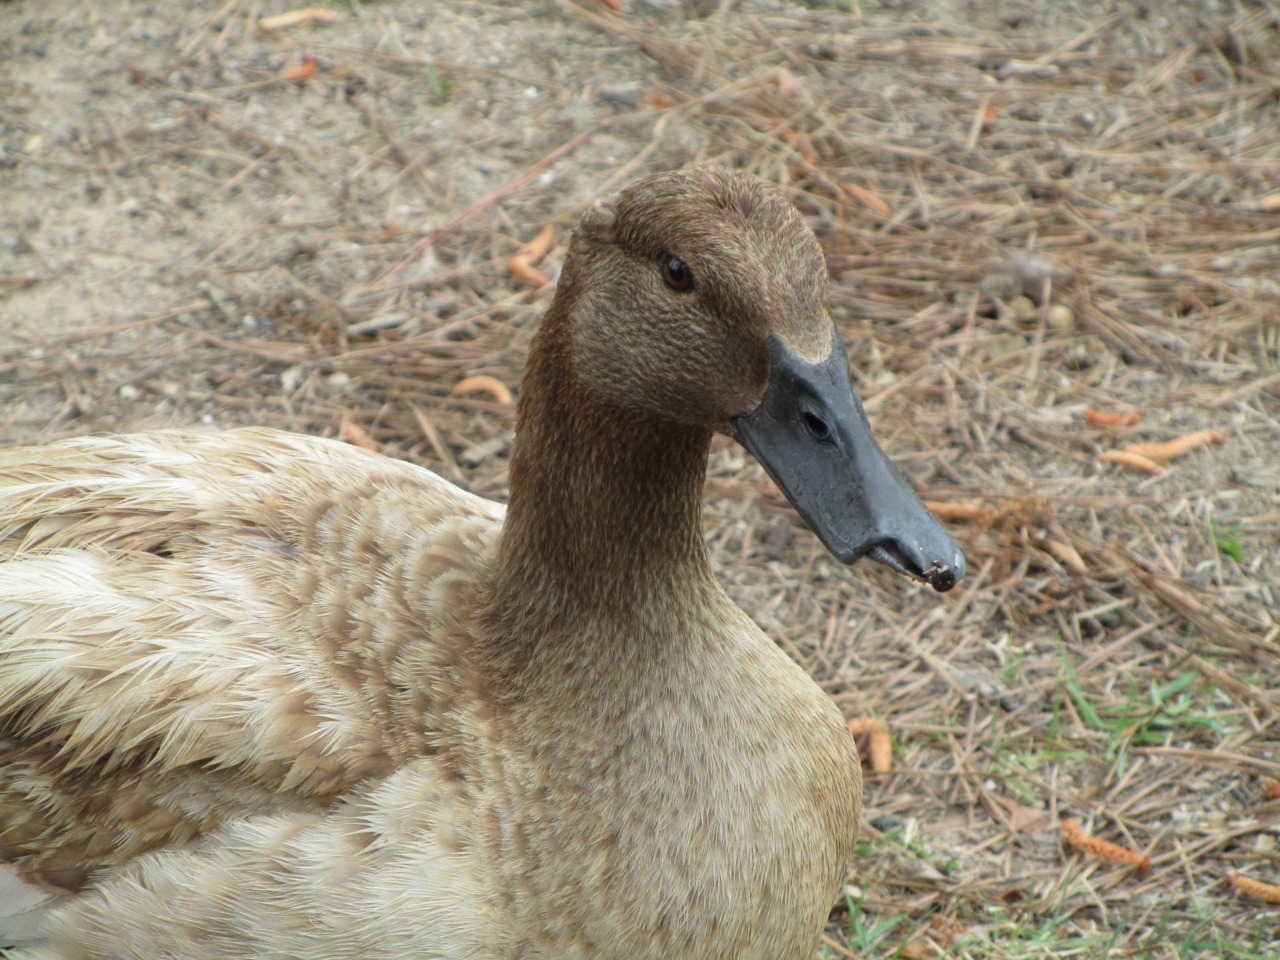 Meet Buckbeak, the sister/bff of the duck that was killed earlier this month. Her